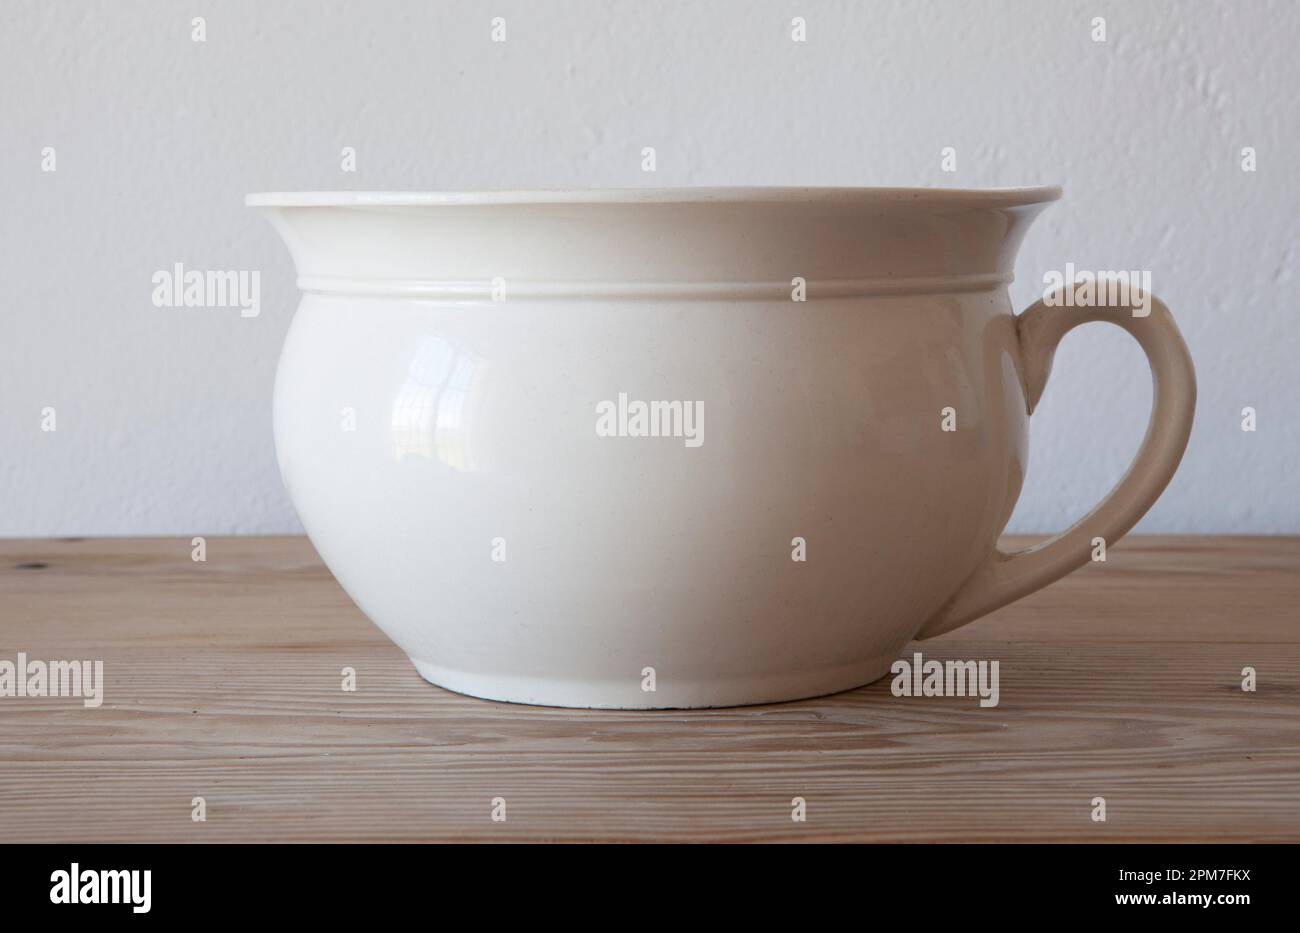 White porcelain camber pot over wooden surface. Selective focus. Stock Photo